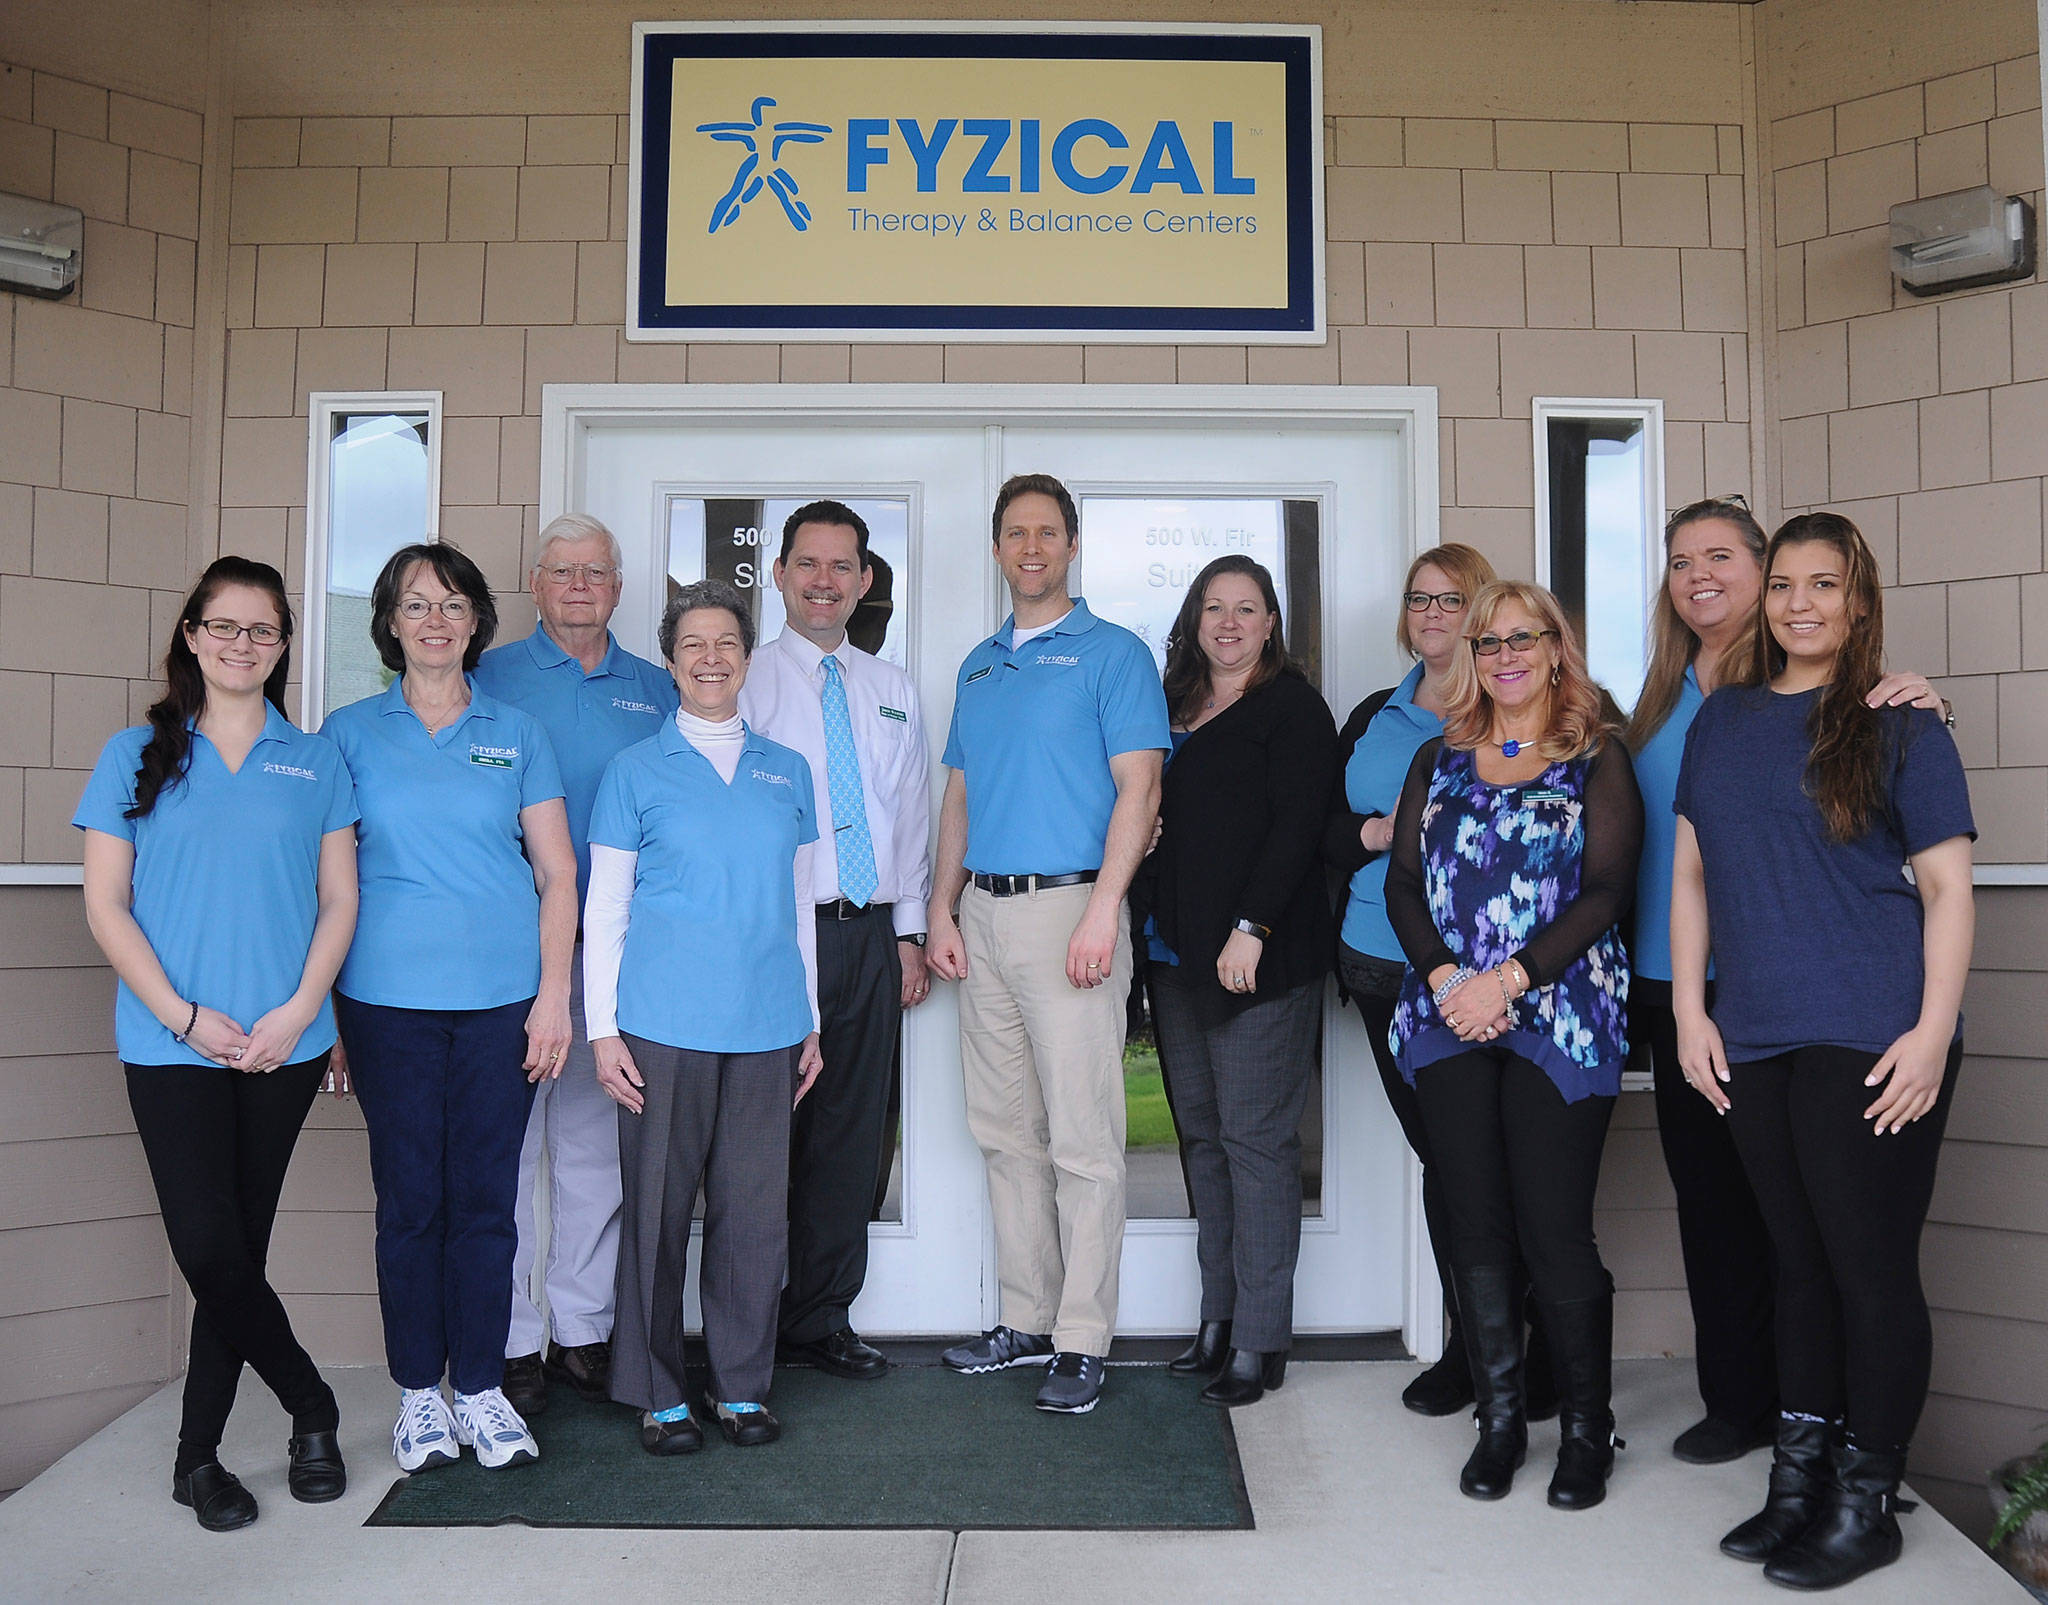 Sequim’s Fyzical Therapy and Balance Center adds key new equipment